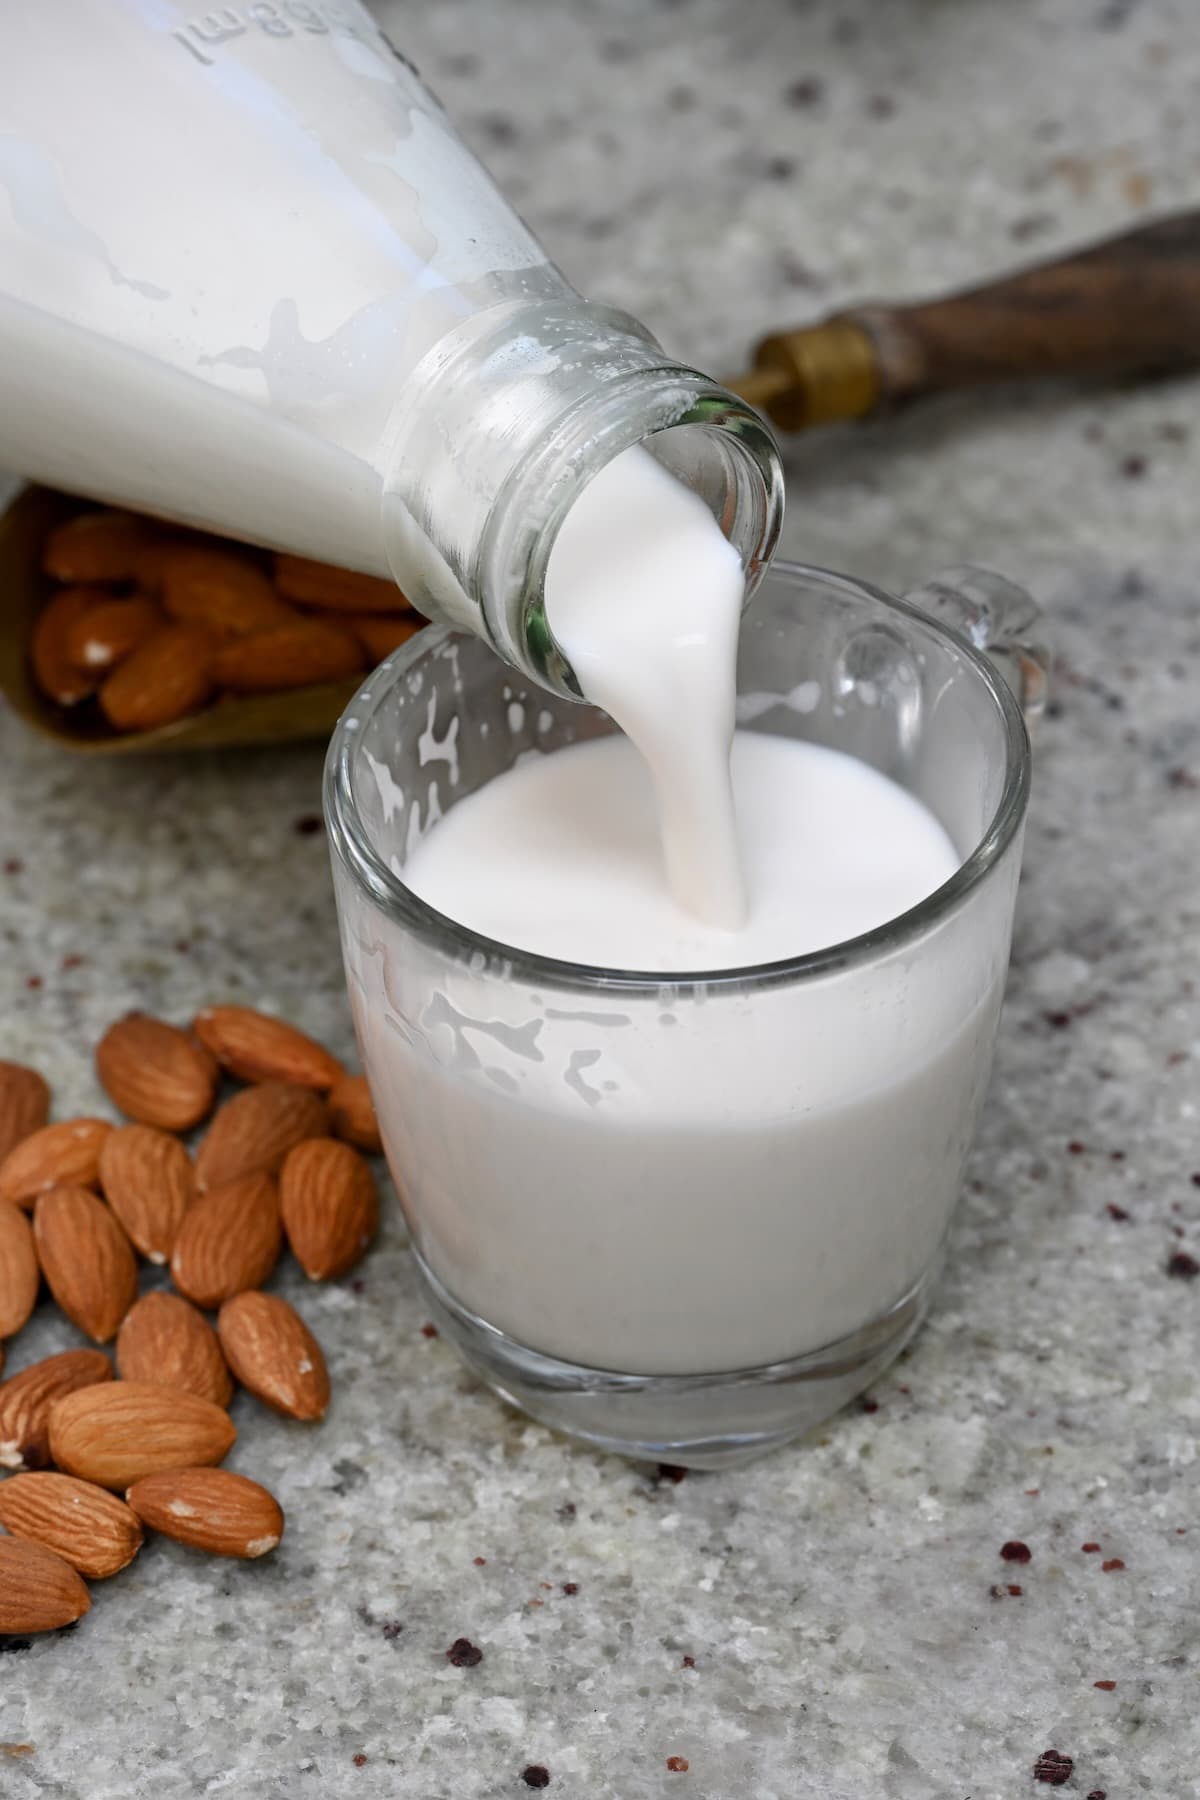 Pouring homemade almond milk in a glass